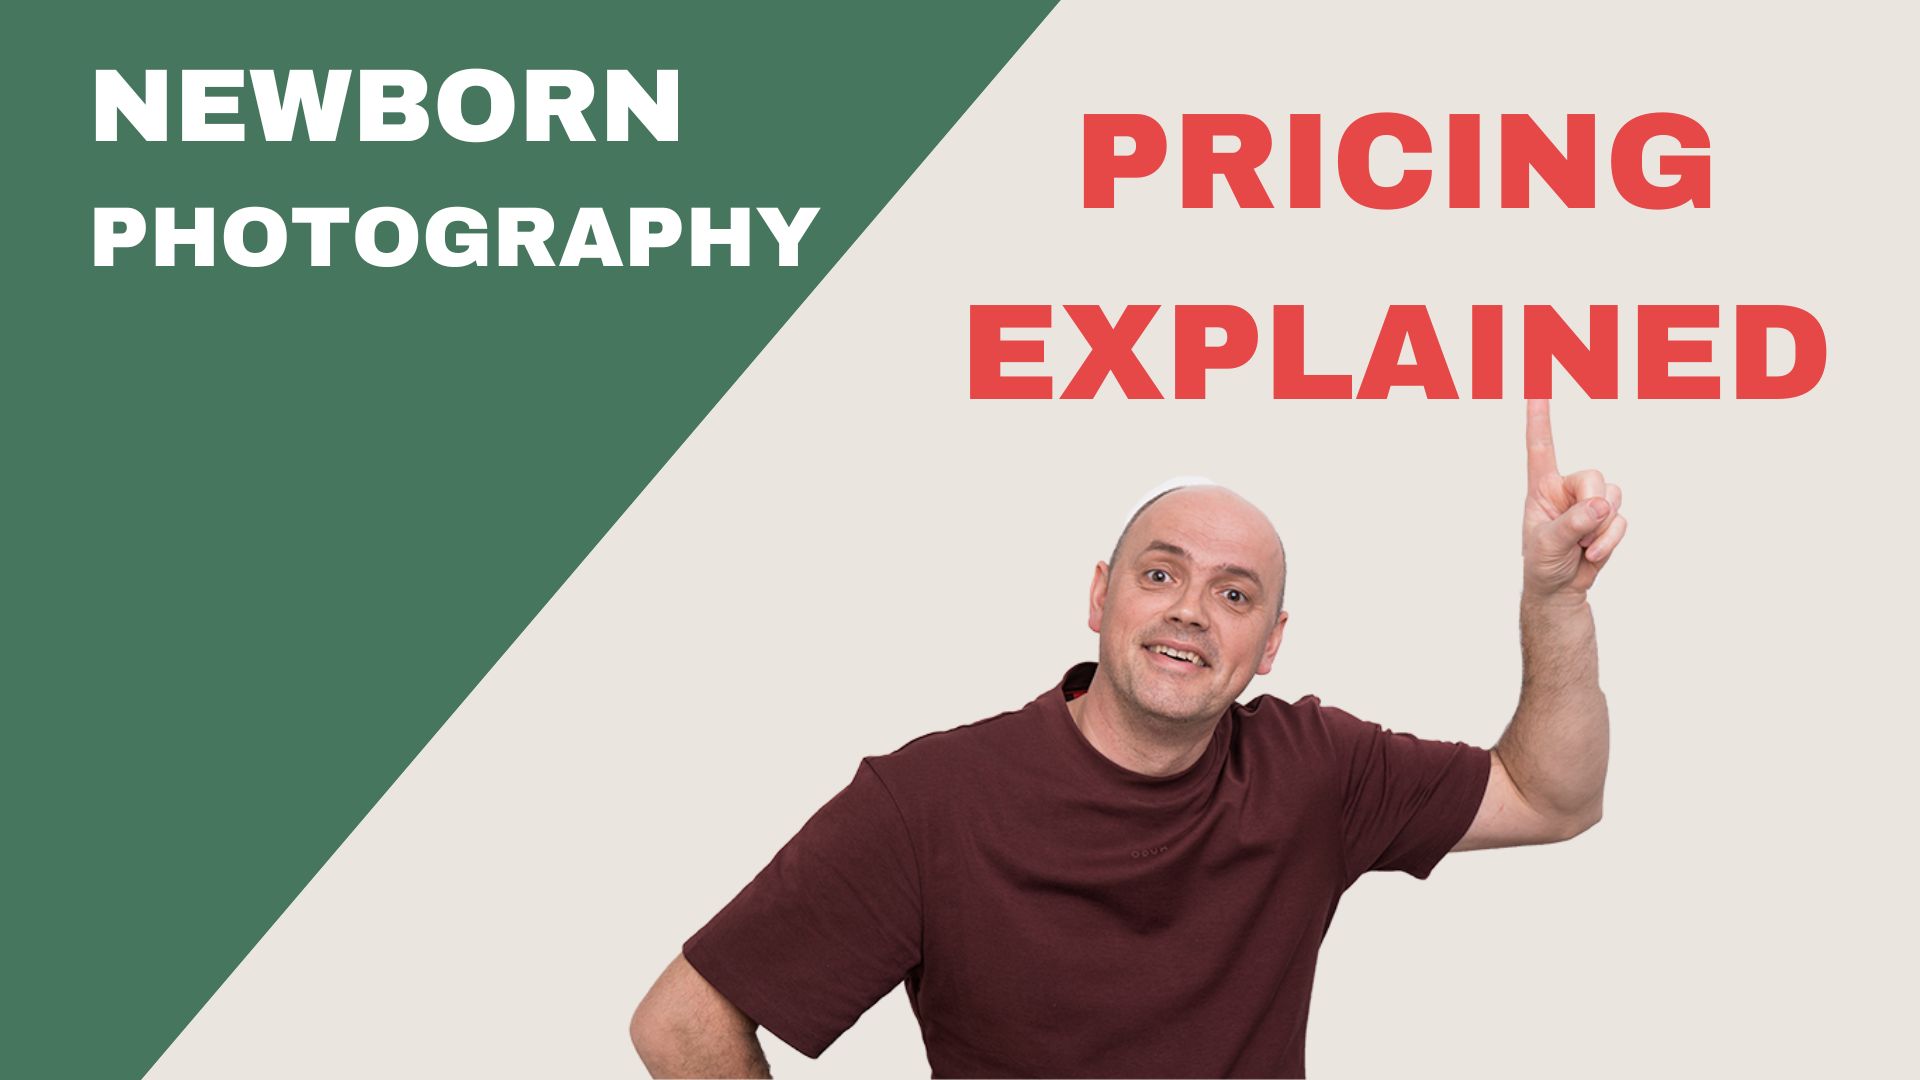 Newborn photography pricing explained